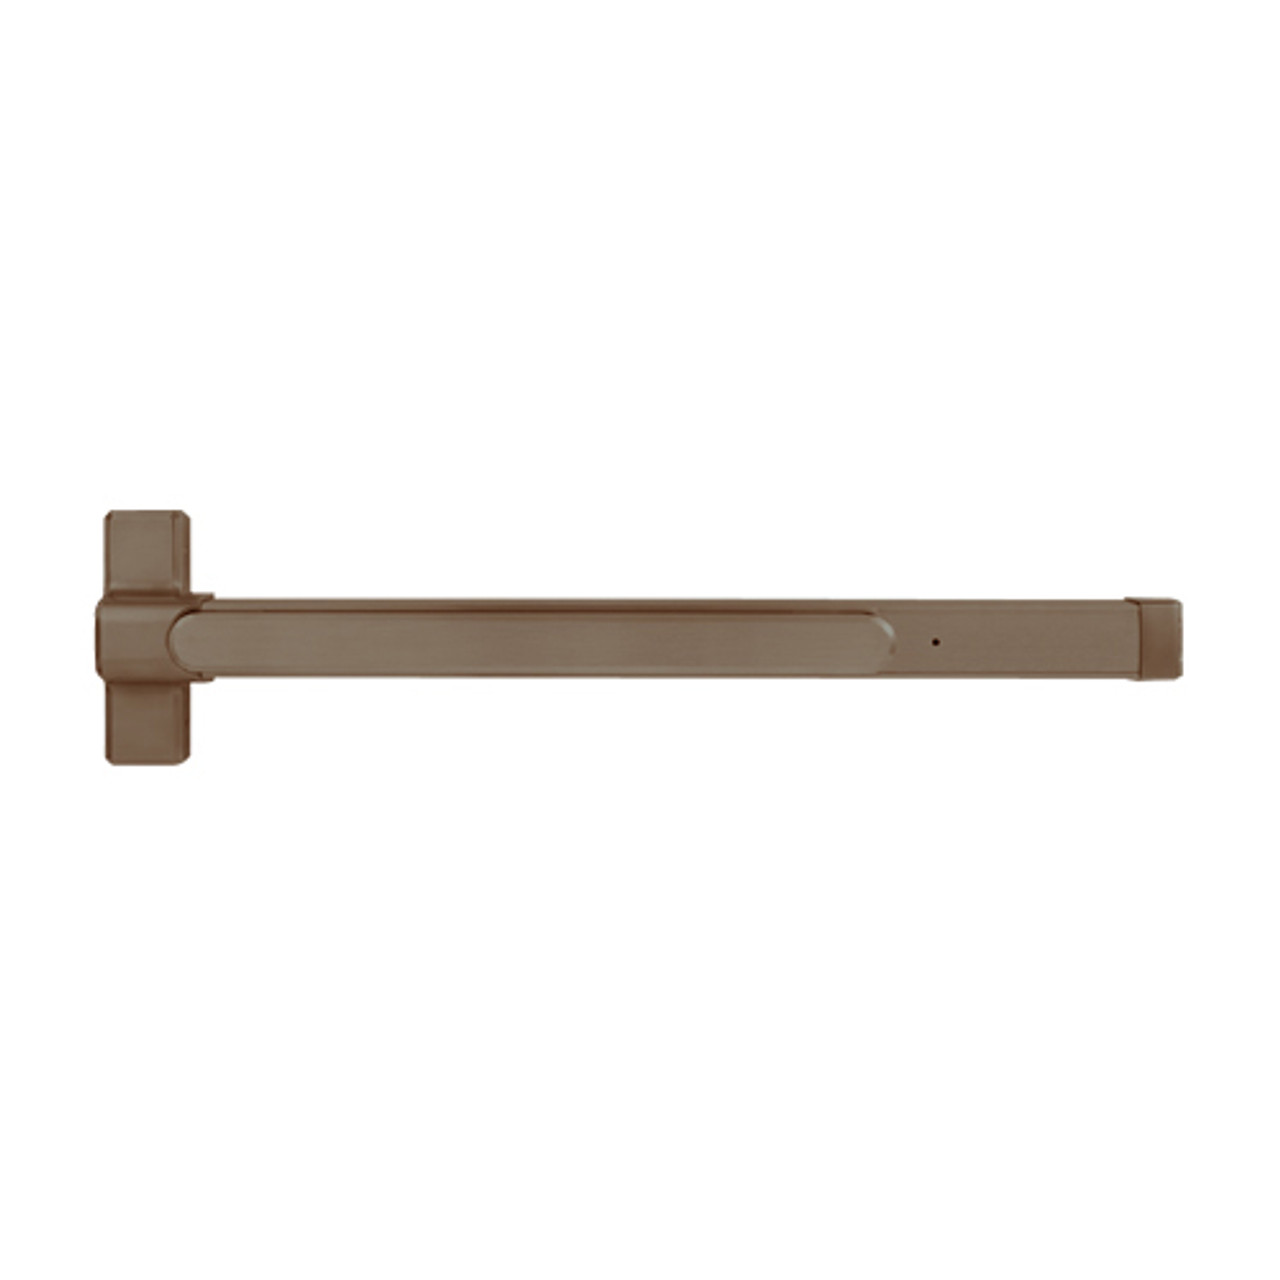 QED127EDX-36-7-313AN Stanley QED100 Series Heavy Duty Concealed Vertical Rod Hex Dog Exit Device in Anodized Duranodic Bronze Finish